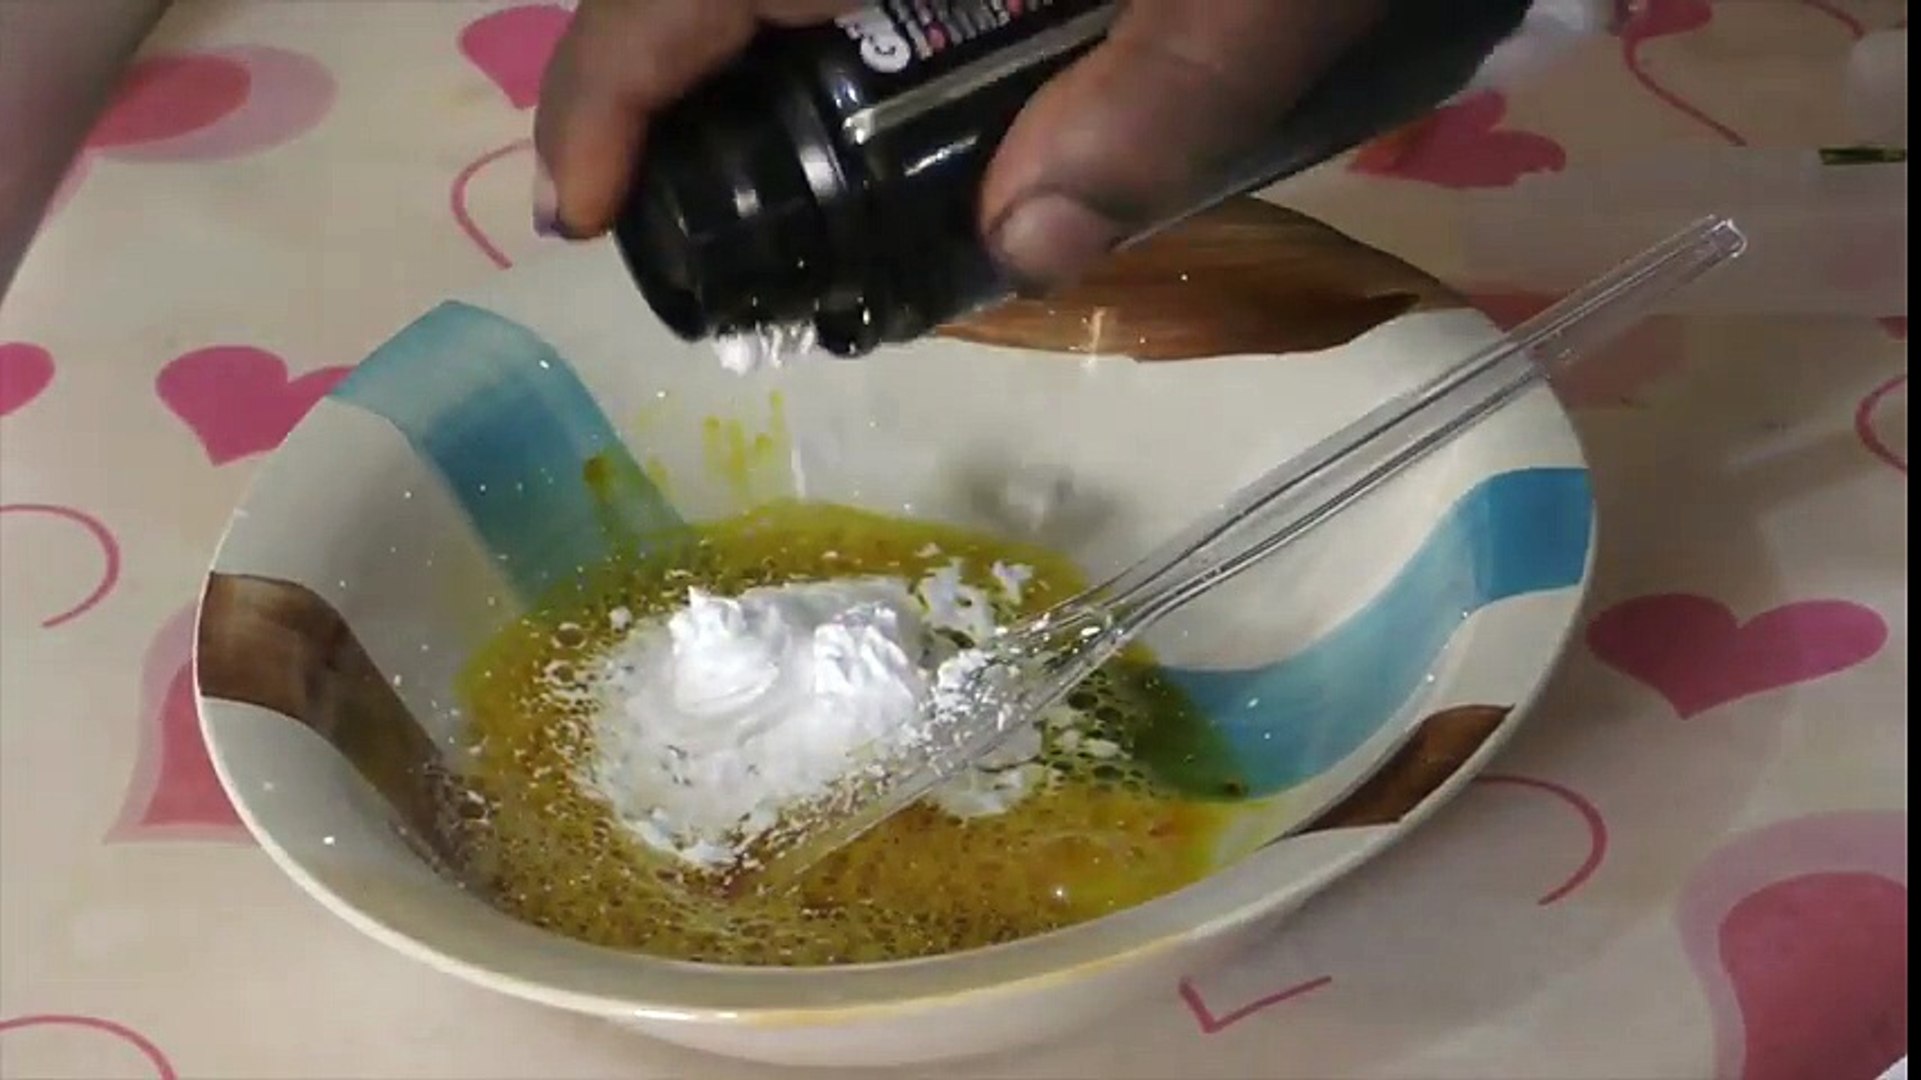 How To Make Fluffy Slime Without Glue Or Borax Baking Soda Cornstarch Face Mask